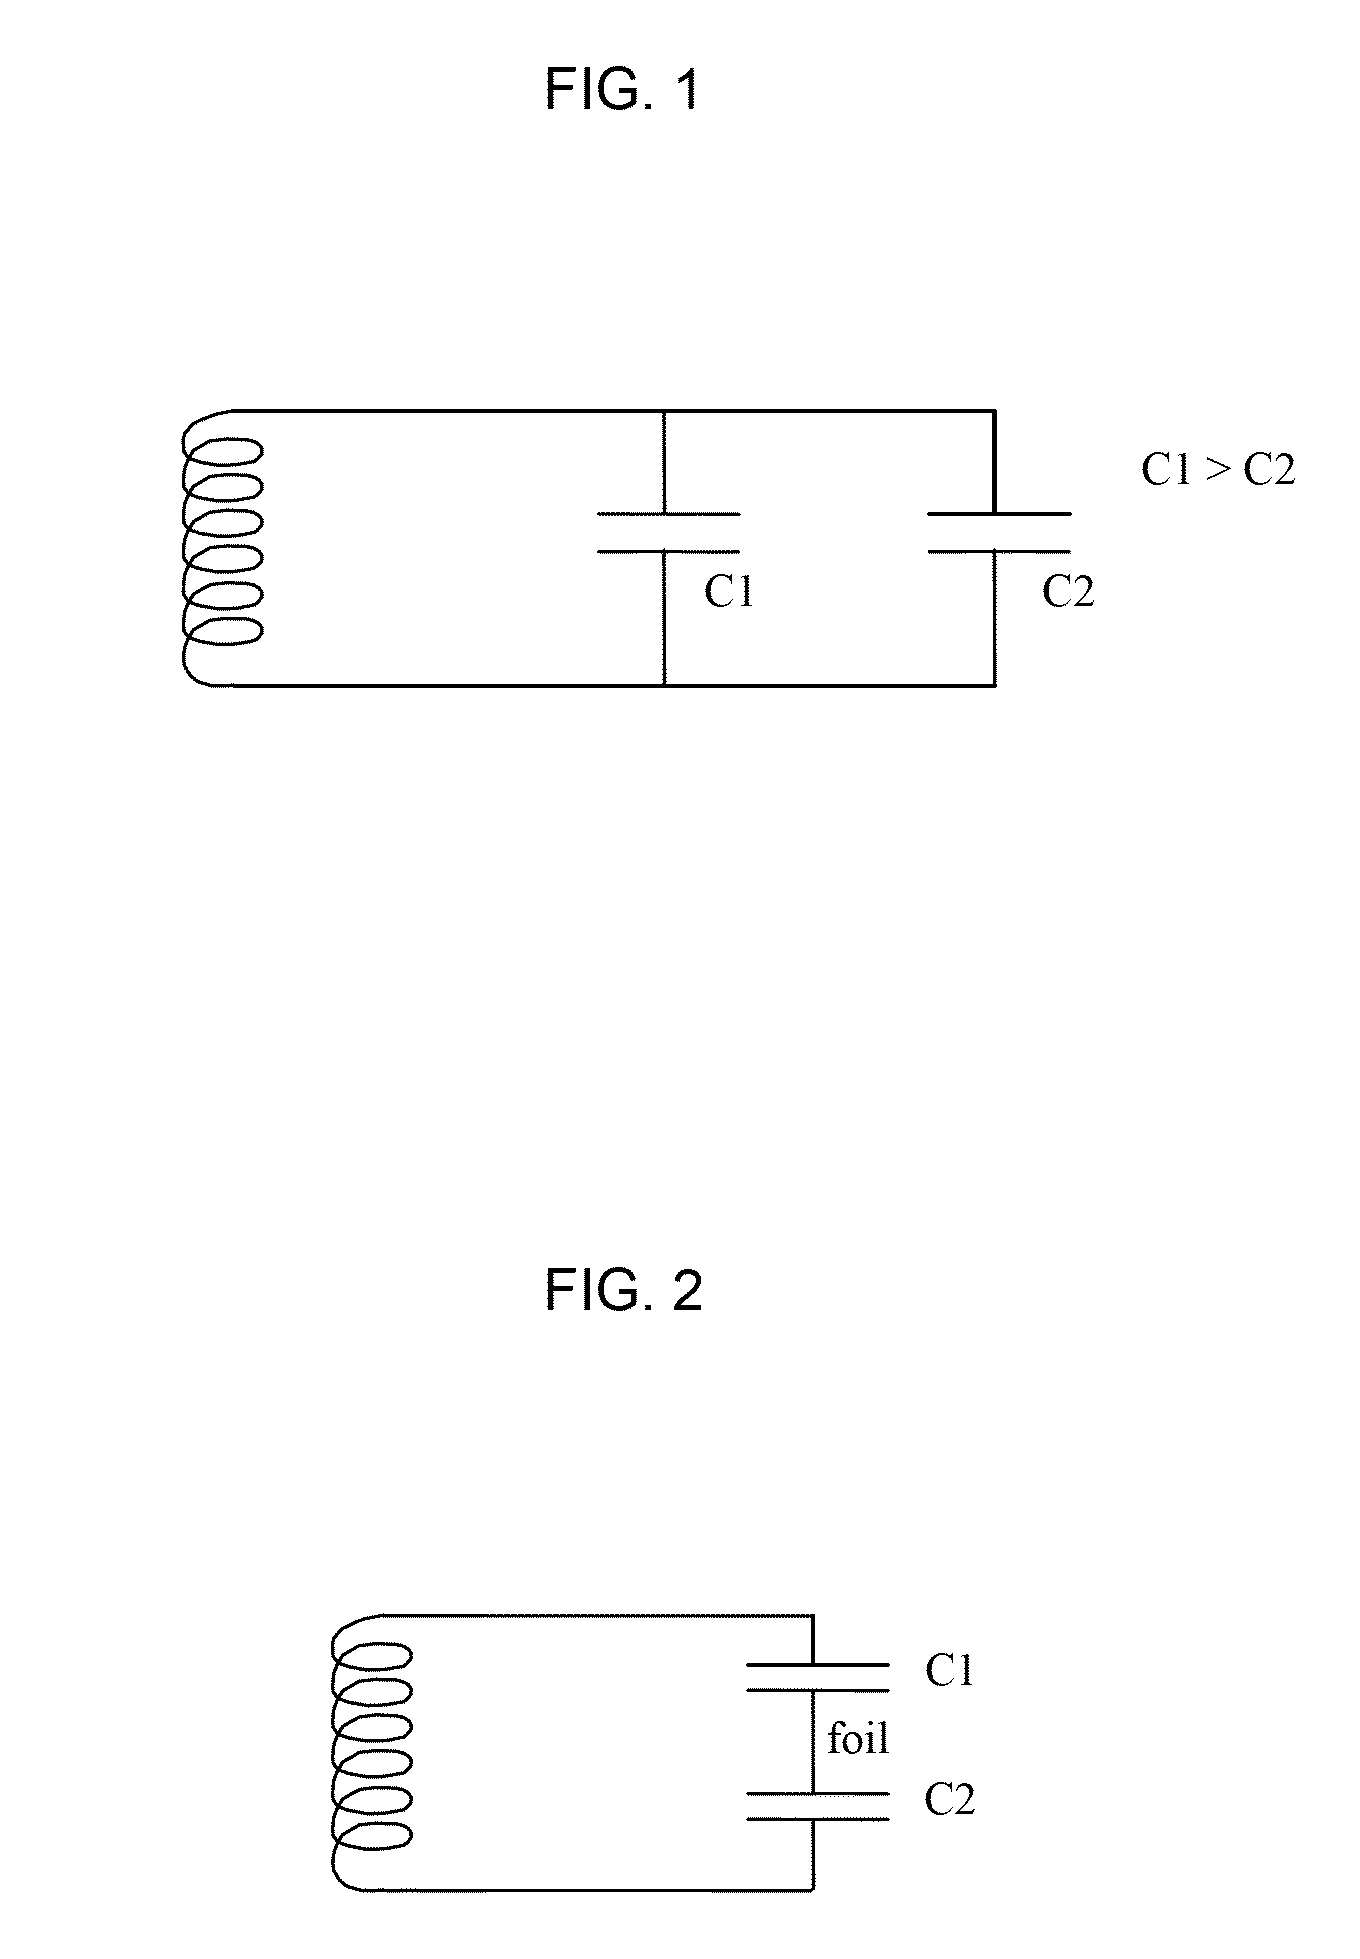 Method for making surveillance devices with multiple capacitors